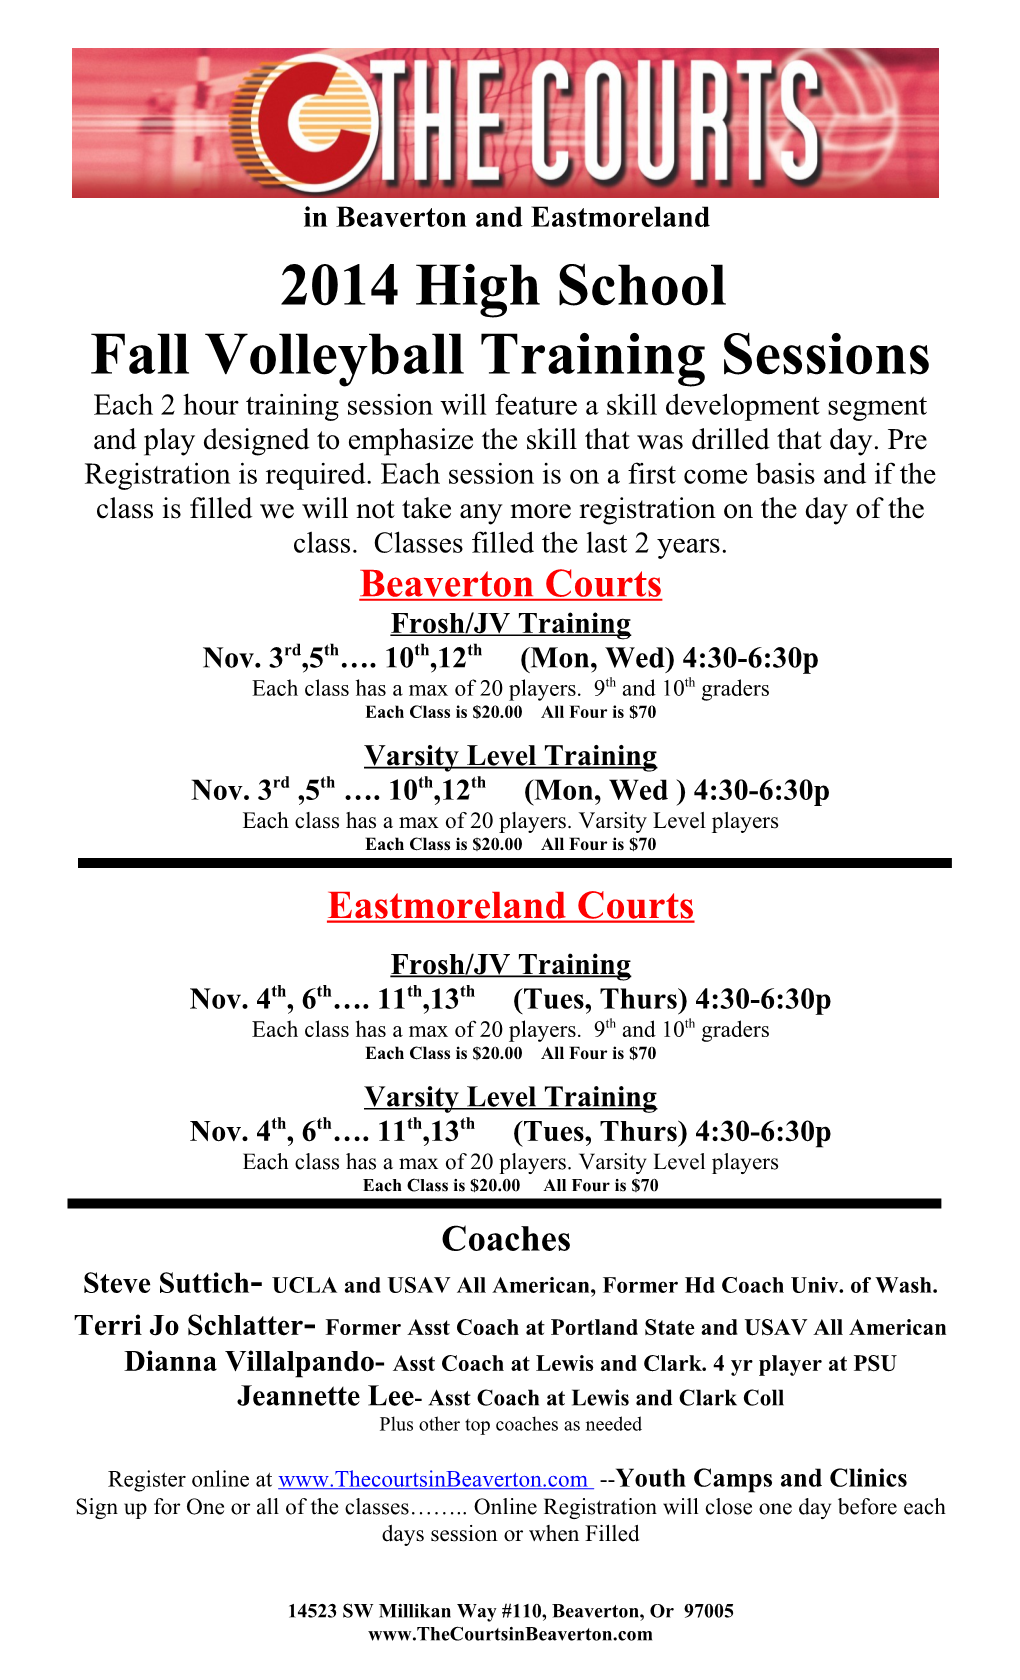 Fall Volleyball Training Sessions